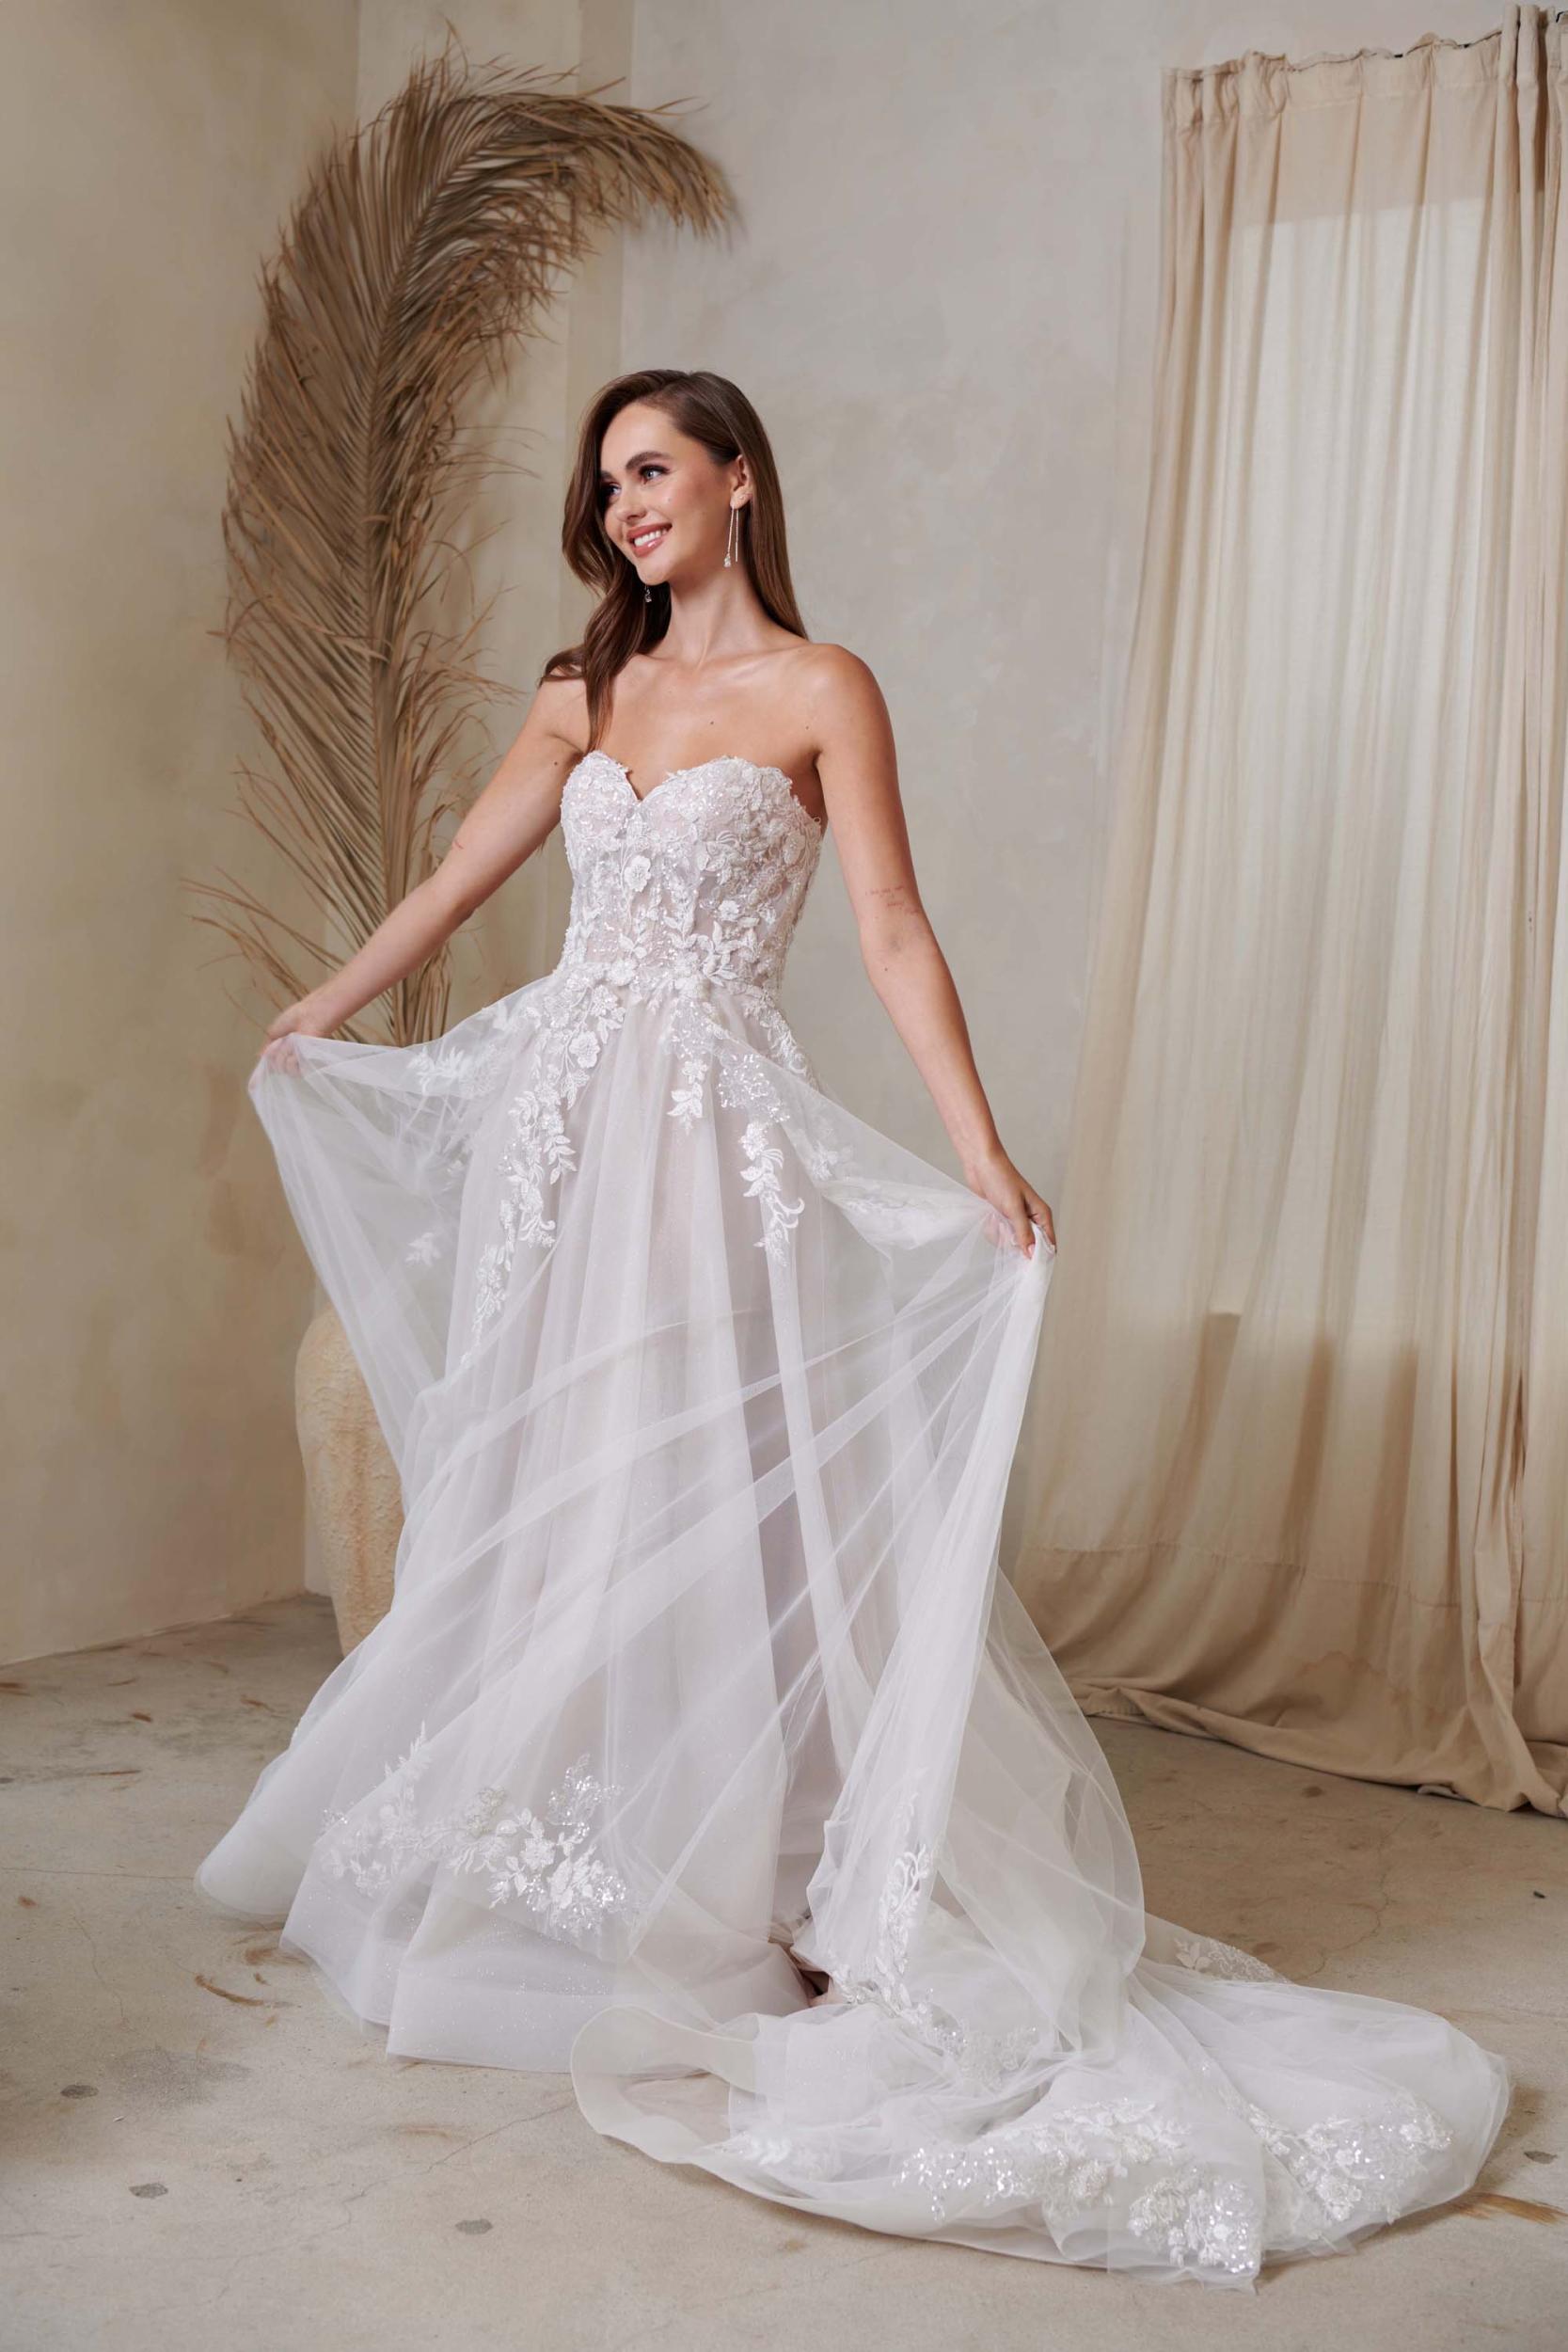 Max Embroidered Lace Strapless Sweetheart Neckline A-Line Wedding Dress